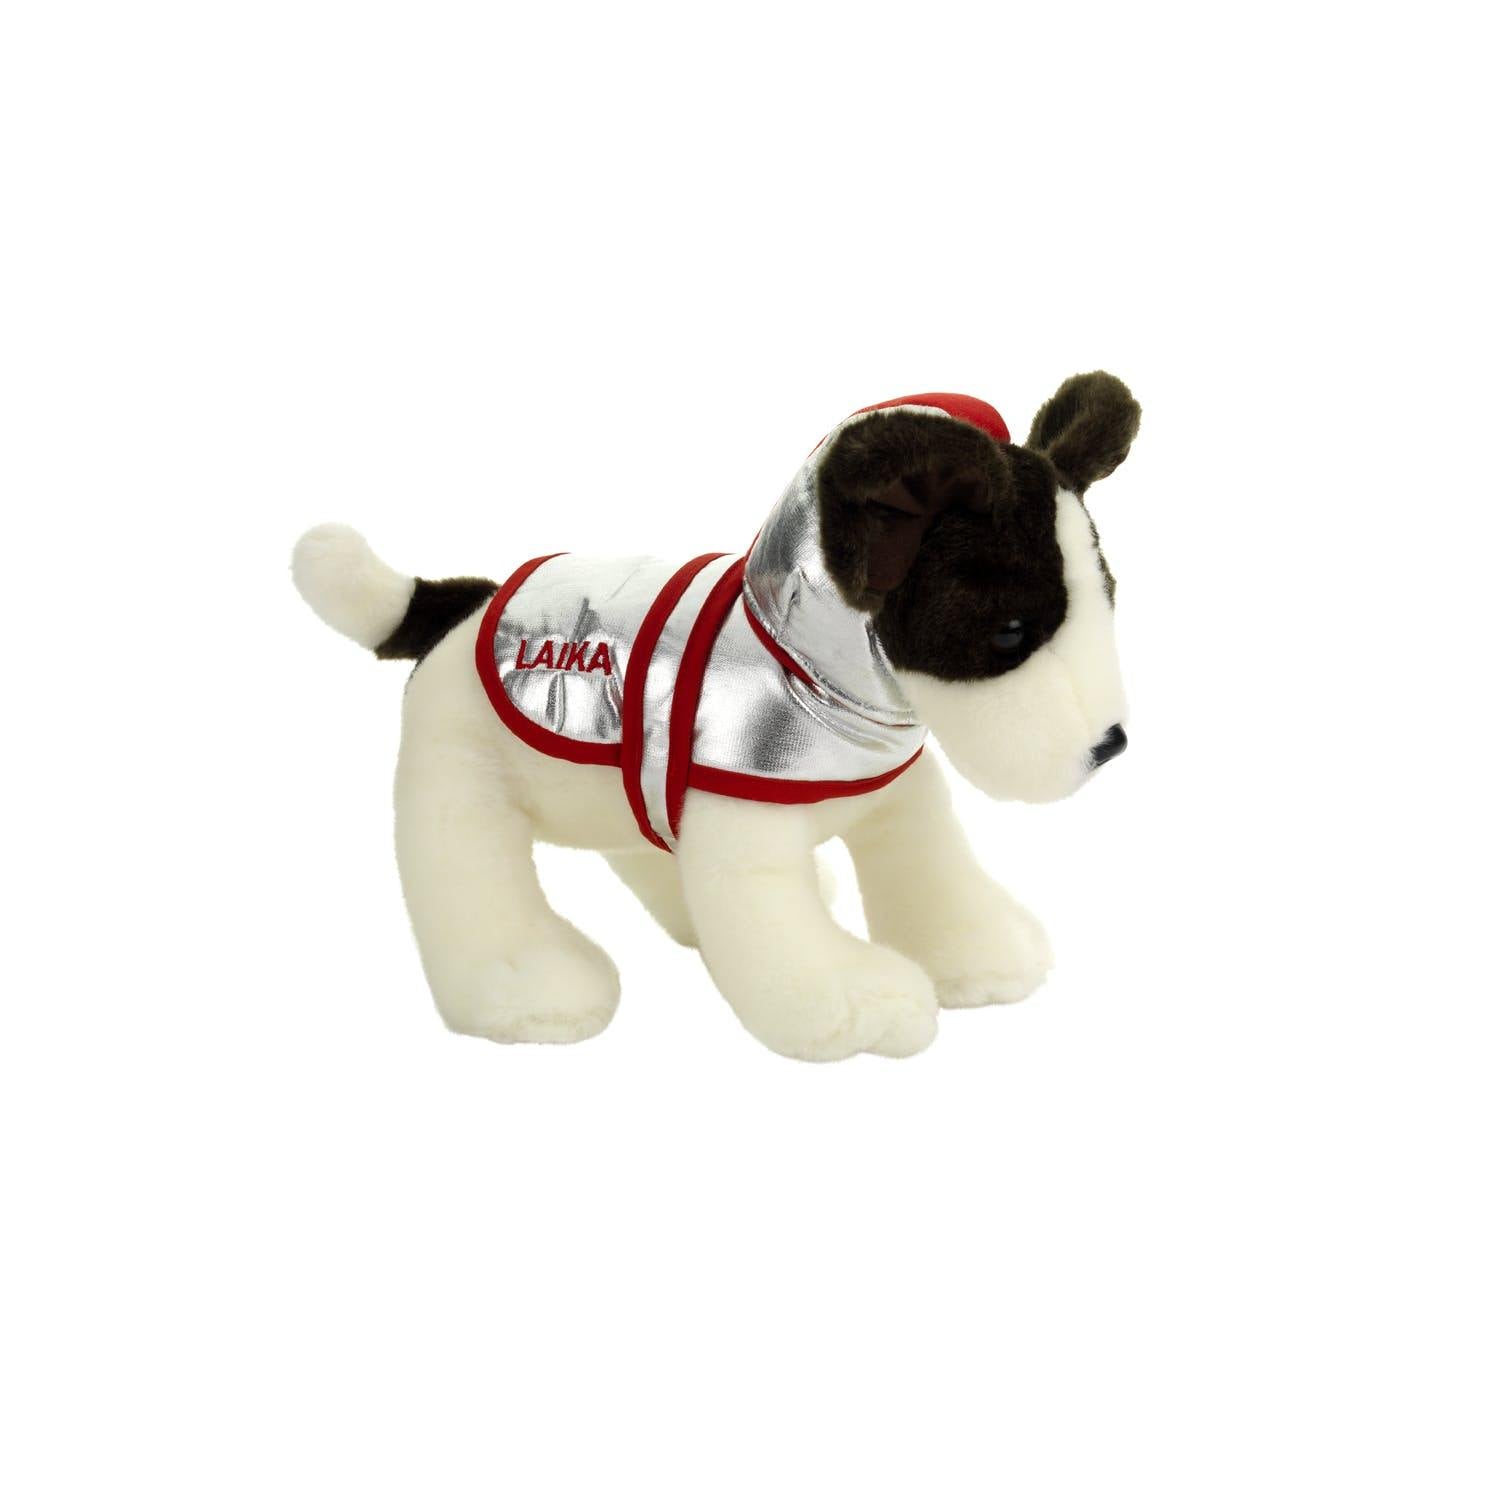 Laika Cuddly Toy Dog-3 - Soft Toy -Science Museum